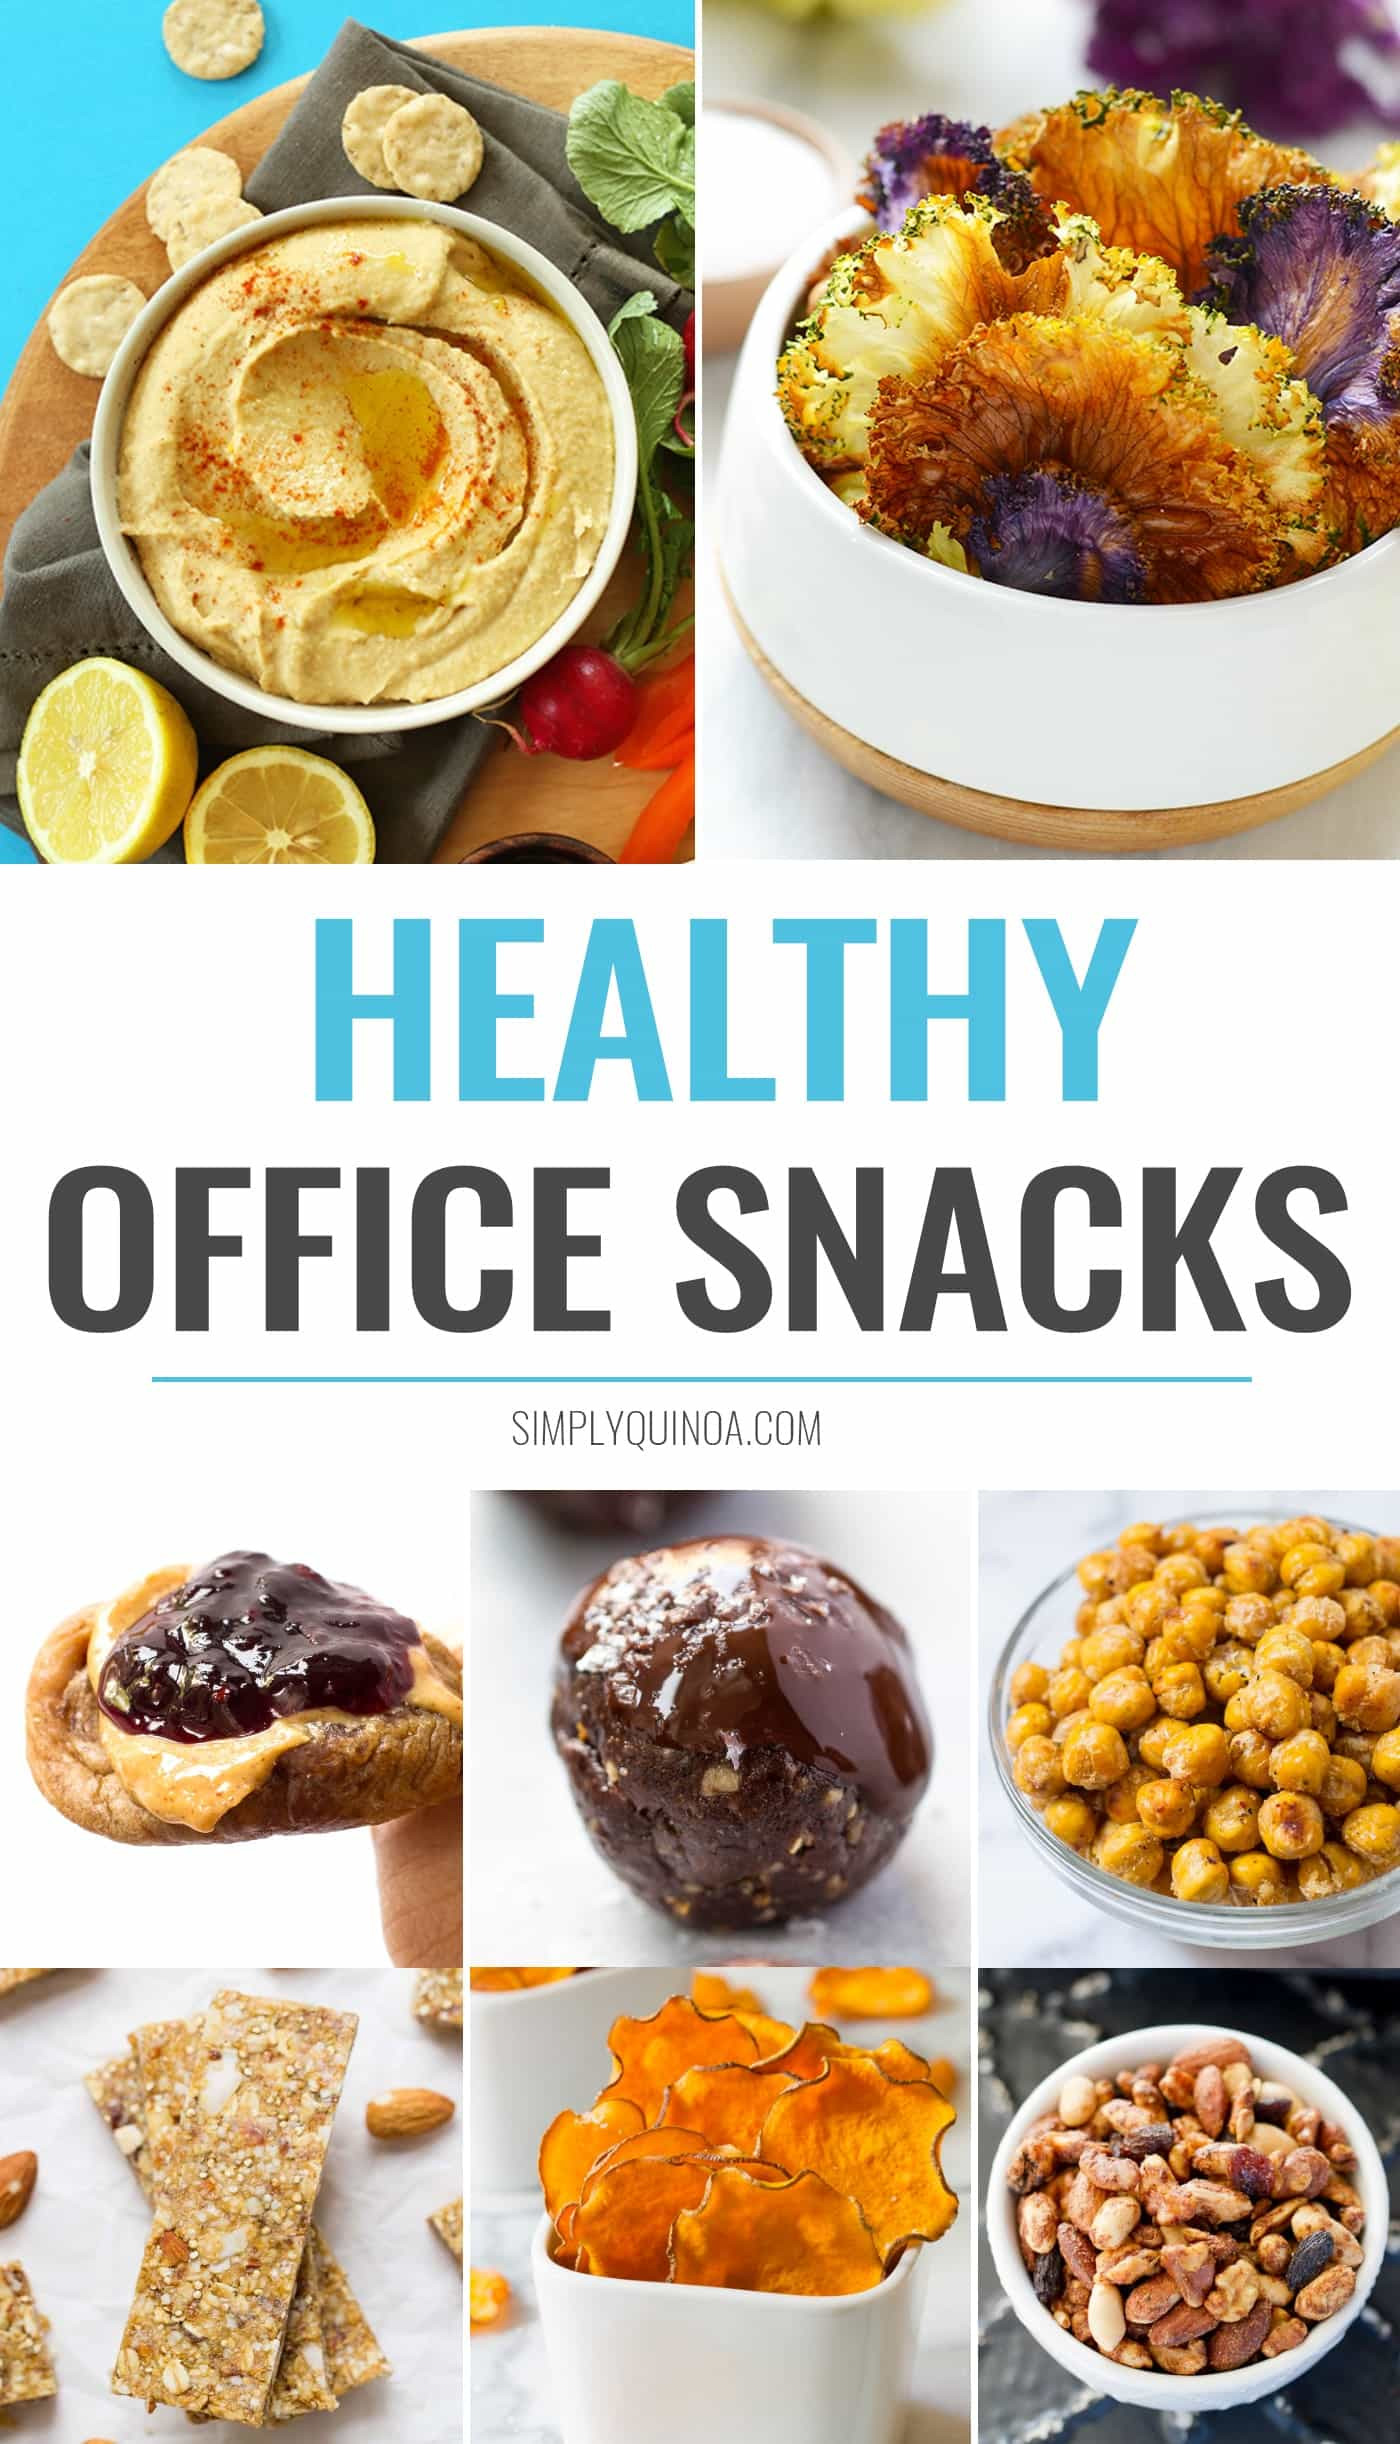 Healthy Snacks For The Office
 The 50 Best Healthy fice Snacks The Planet Simply